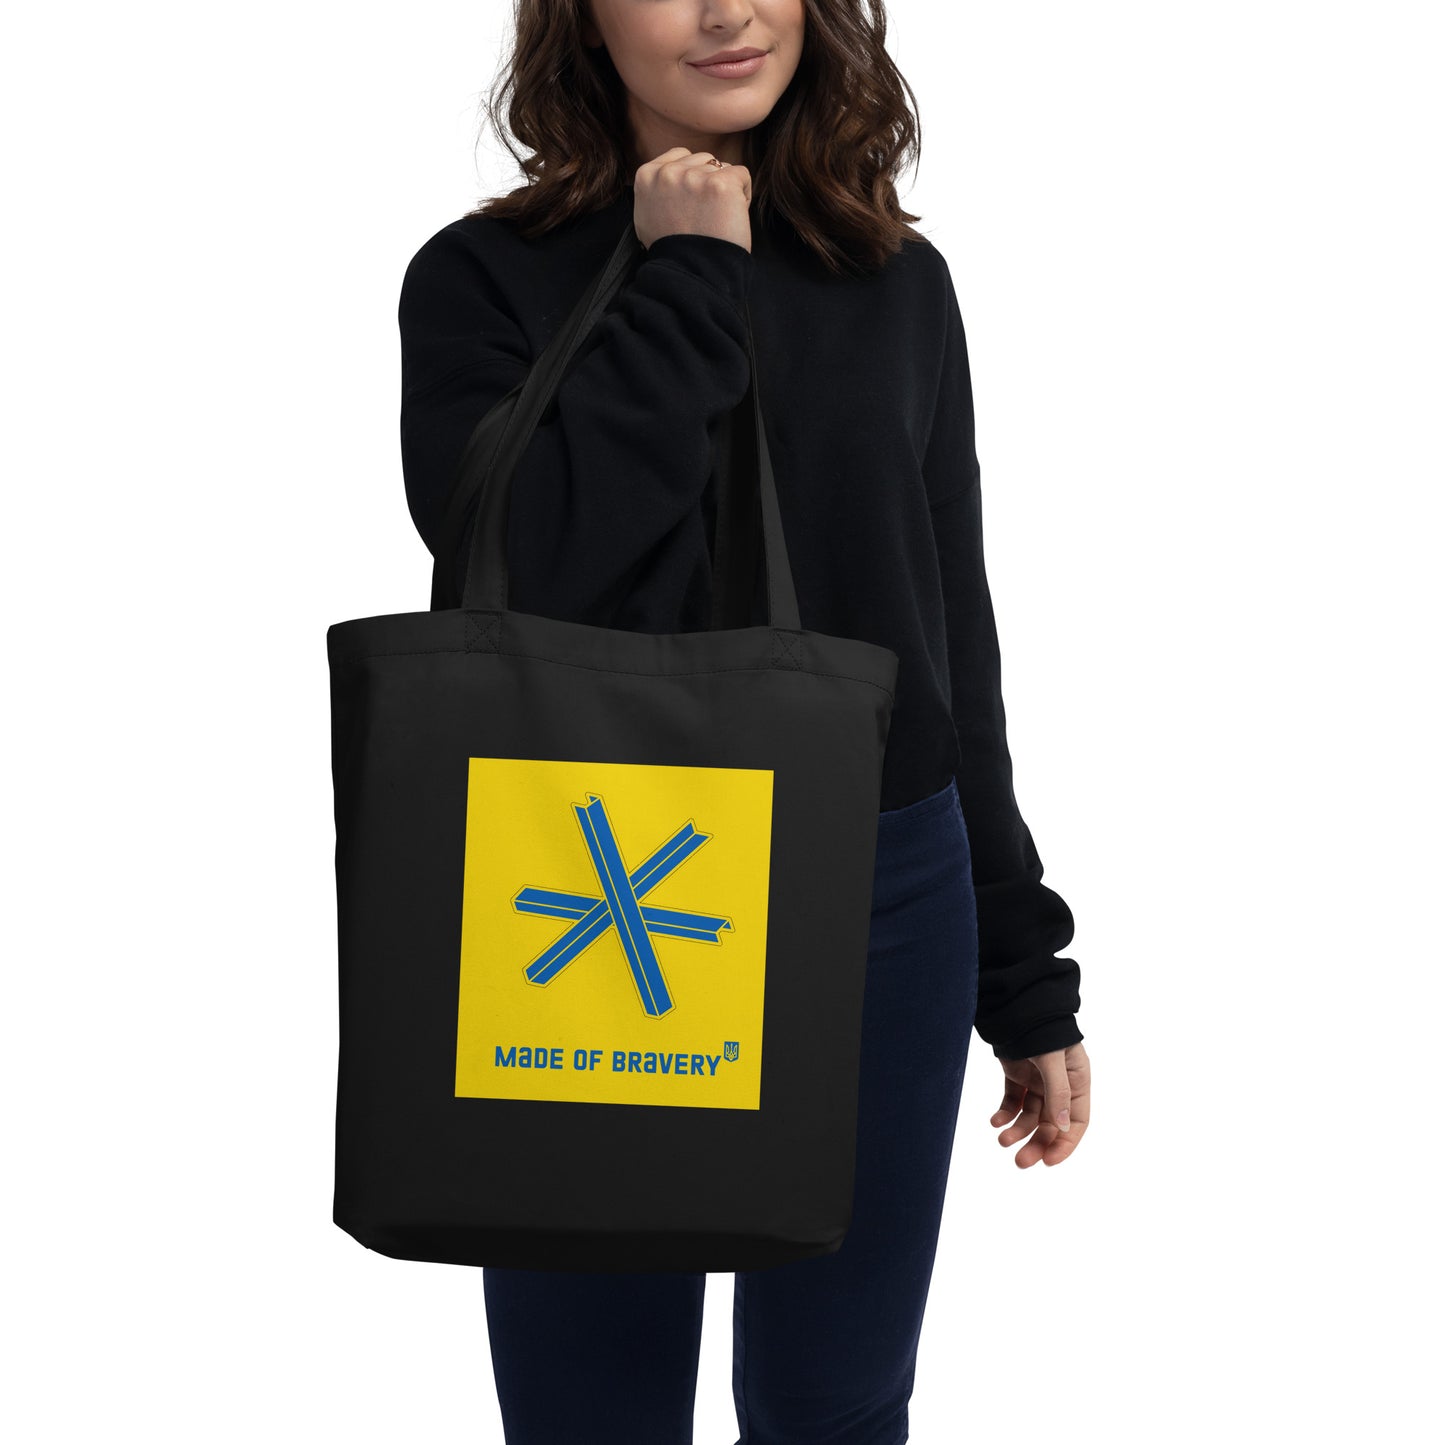 Made of bravery yellow Eco Tote Bag in black